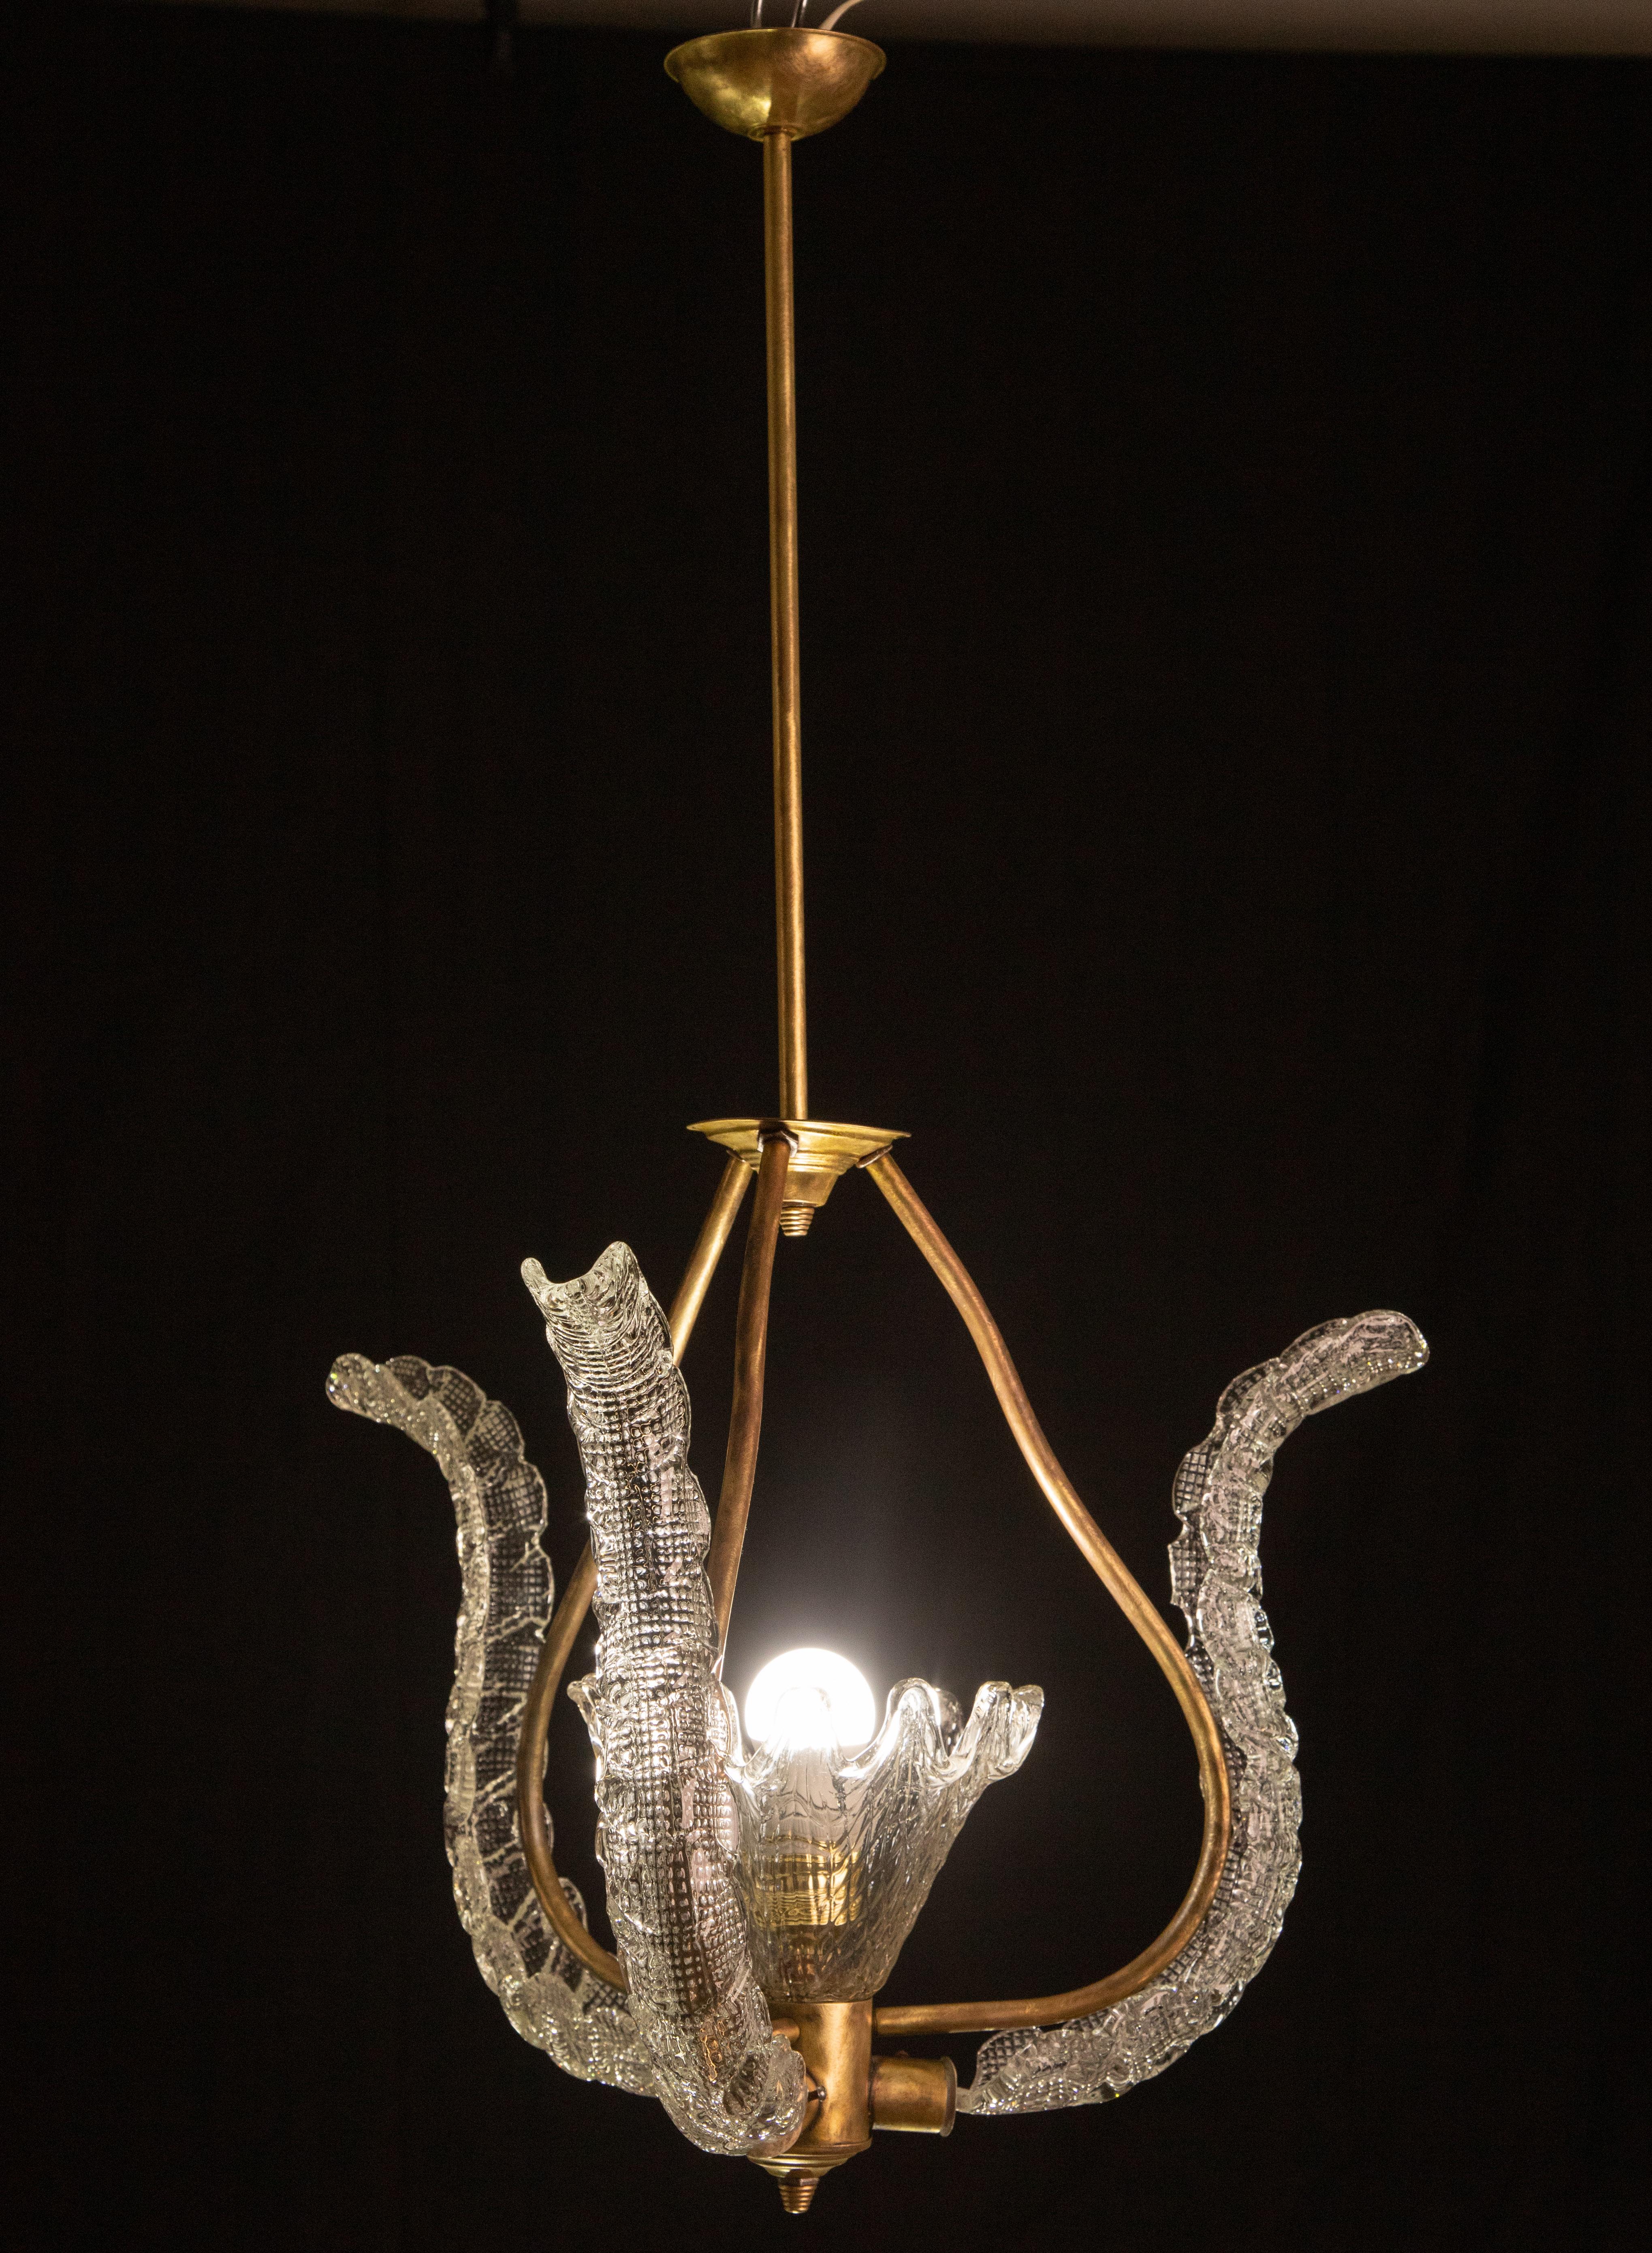 Pretty Murano chandelier attributed to Ercole Barovier special for decorating any kind of space.

The chandelier consists of 3 leaves and a glass element with an e27 light at the base.

One of the 3 leaves has an imperfection not visible to the